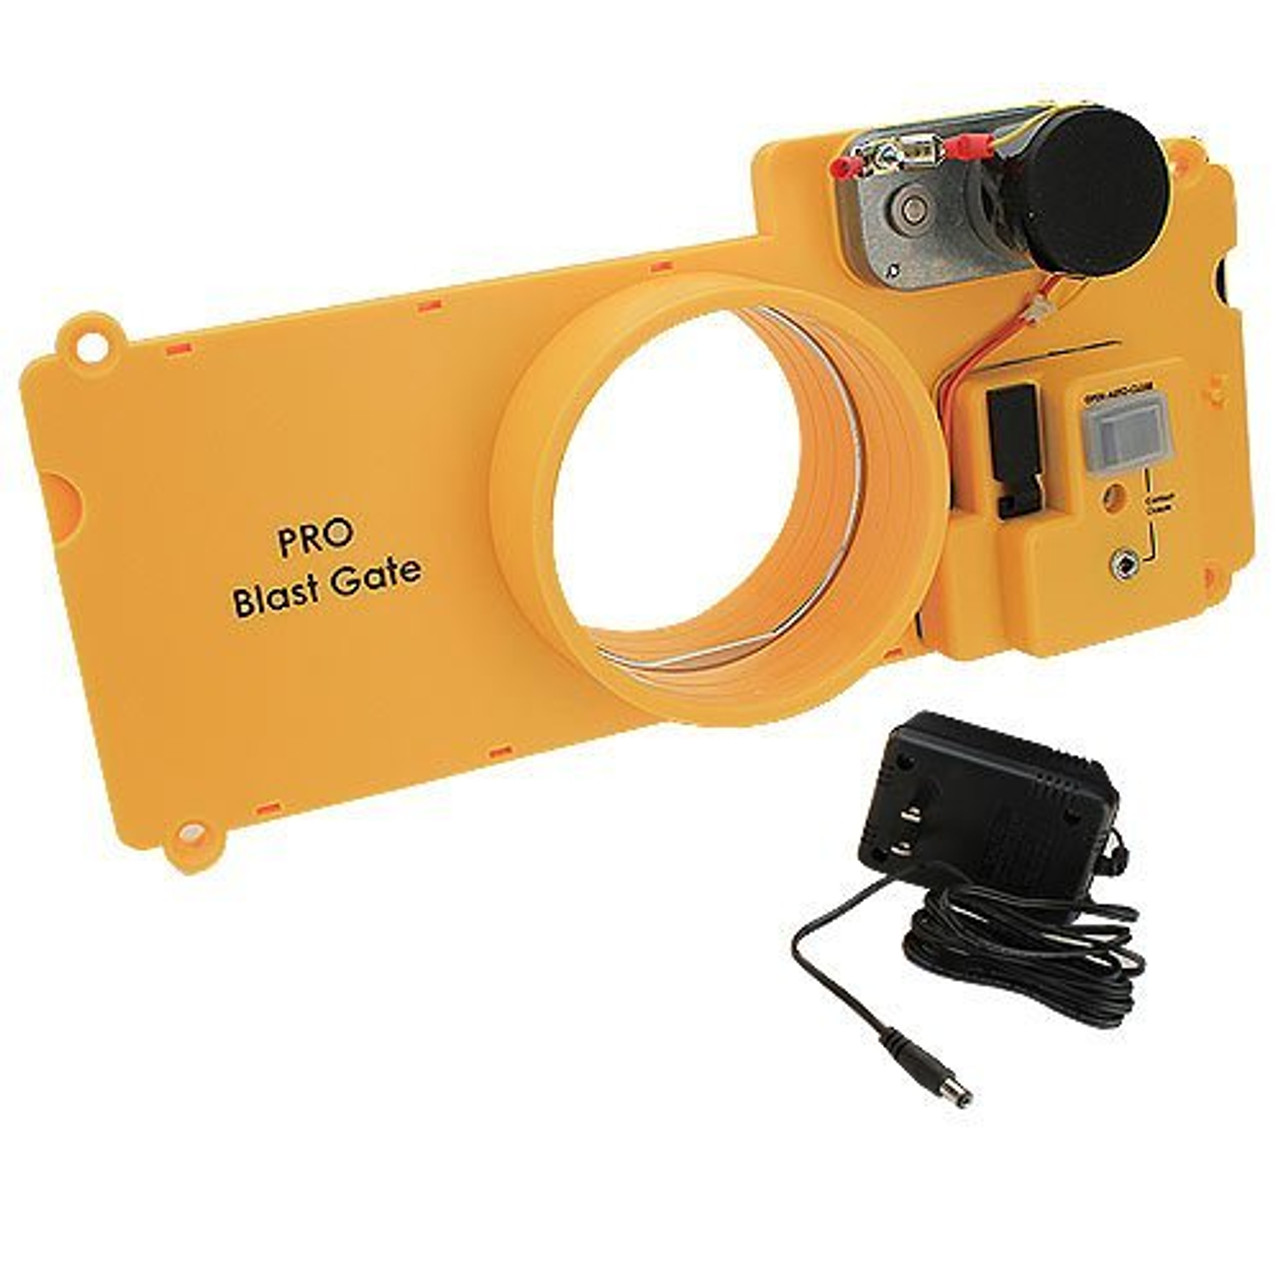 iVAC PBG04 4" Pro Blast Gate for Automated Dust Collection